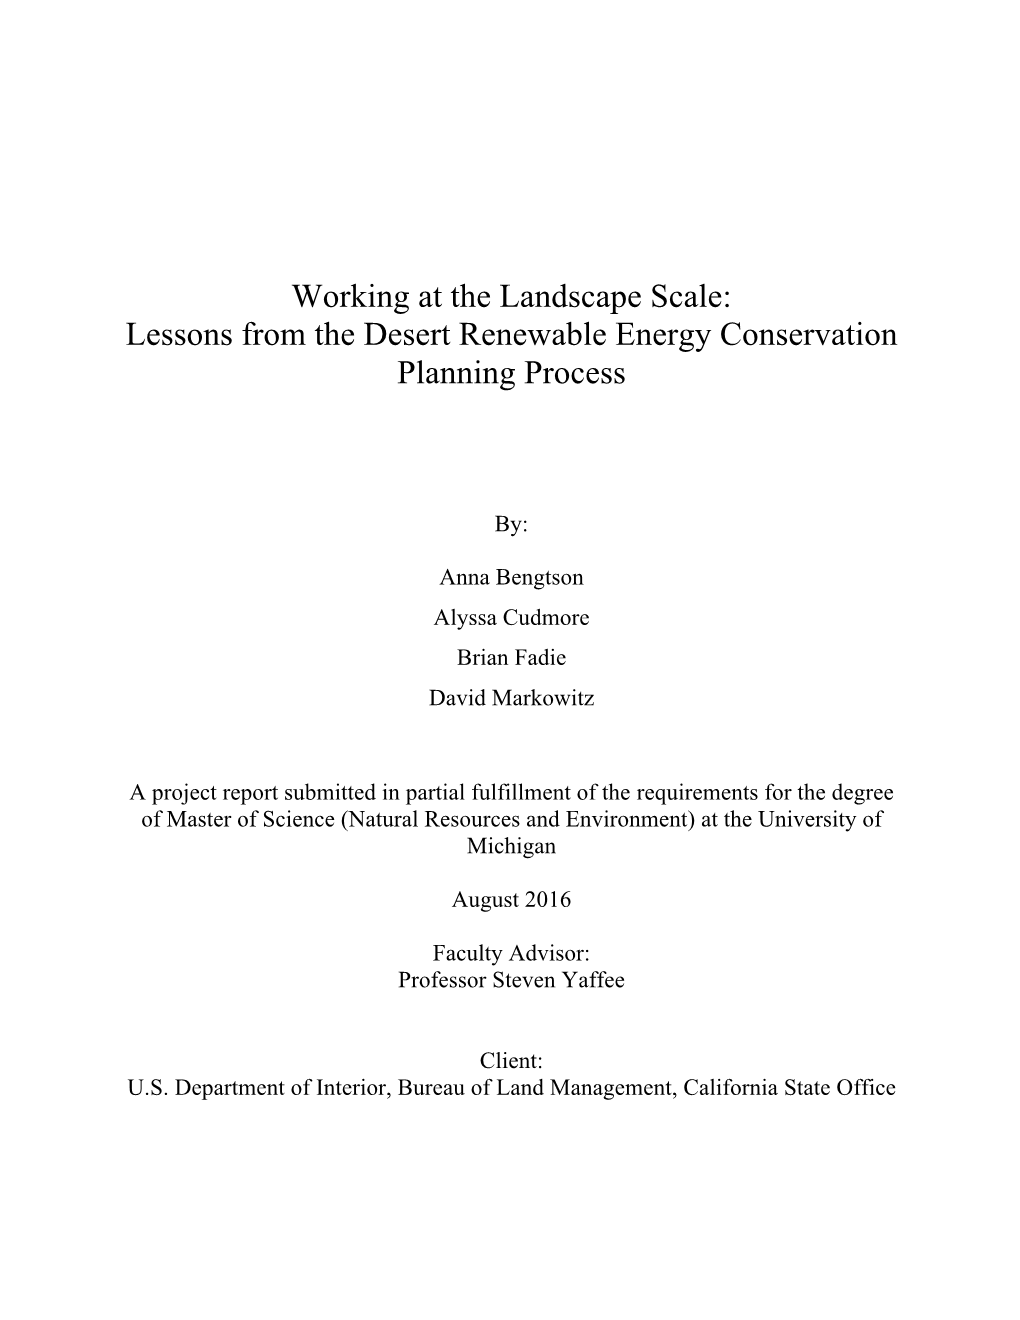 Working at the Landscape Scale: Lessons from the Desert Renewable Energy Conservation Planning Process